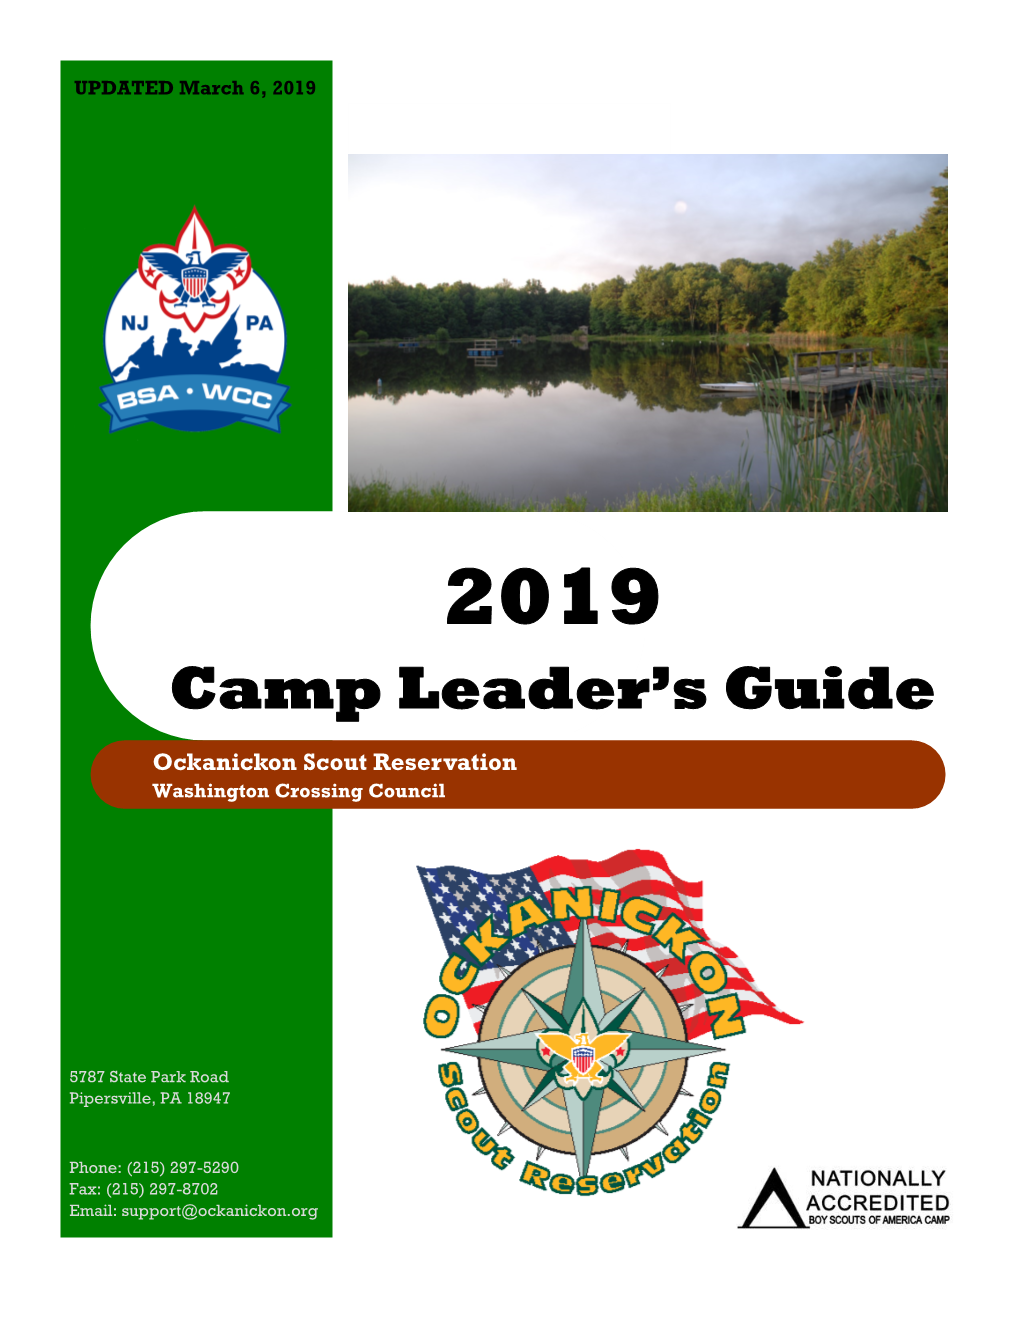 Camp Leader's Guide